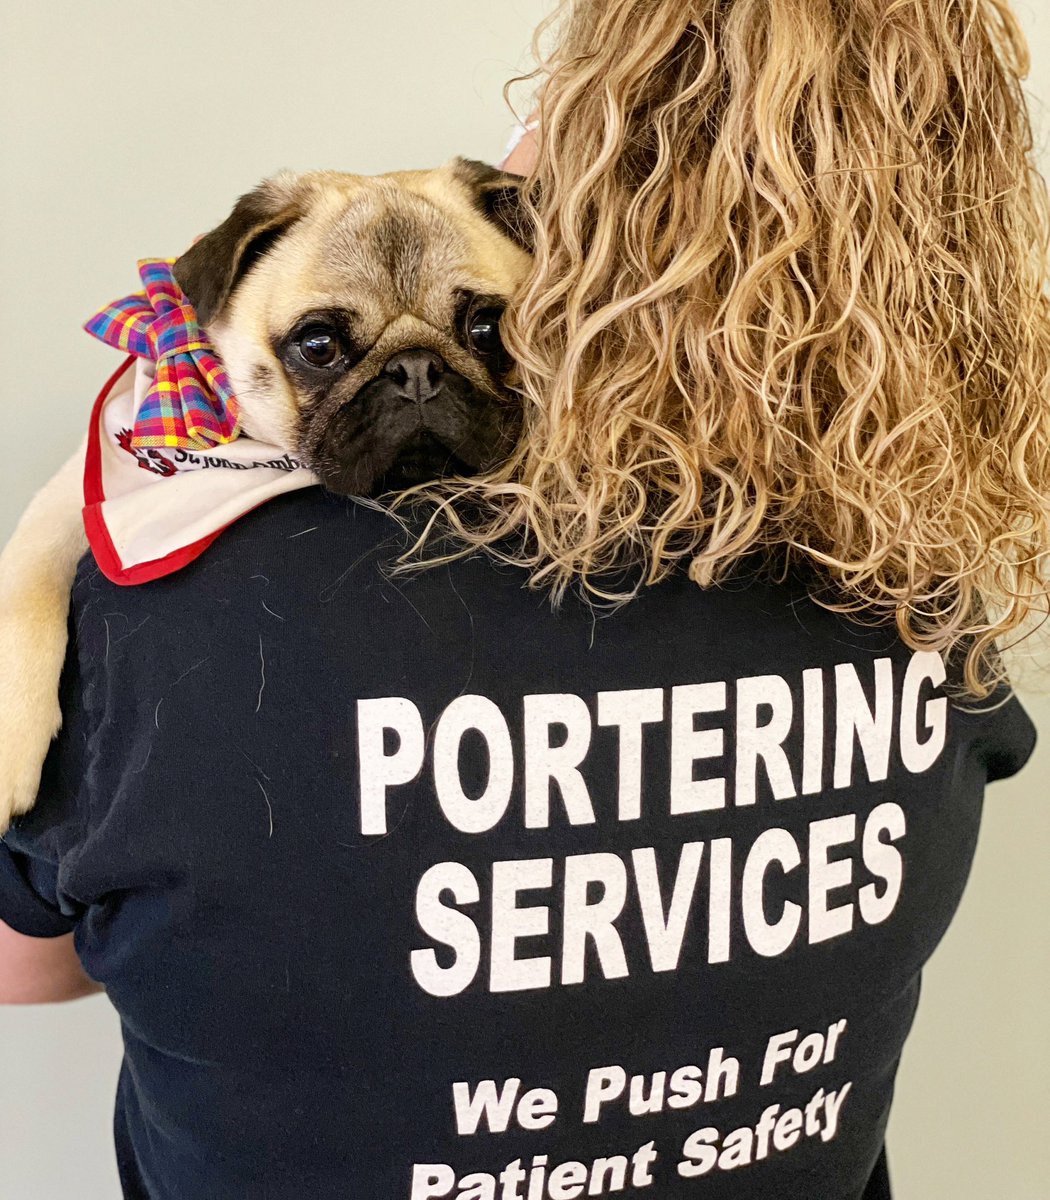 Got “Portered” around today on our #therapydog visit to @LHSCCanada #UniversityHospital Portering Services #StressBuster visit ❣️🤣~ Lil C 

#pug #londonont #pugsnotdrugs #hospital #stressrelief @LdnTherapyDogs